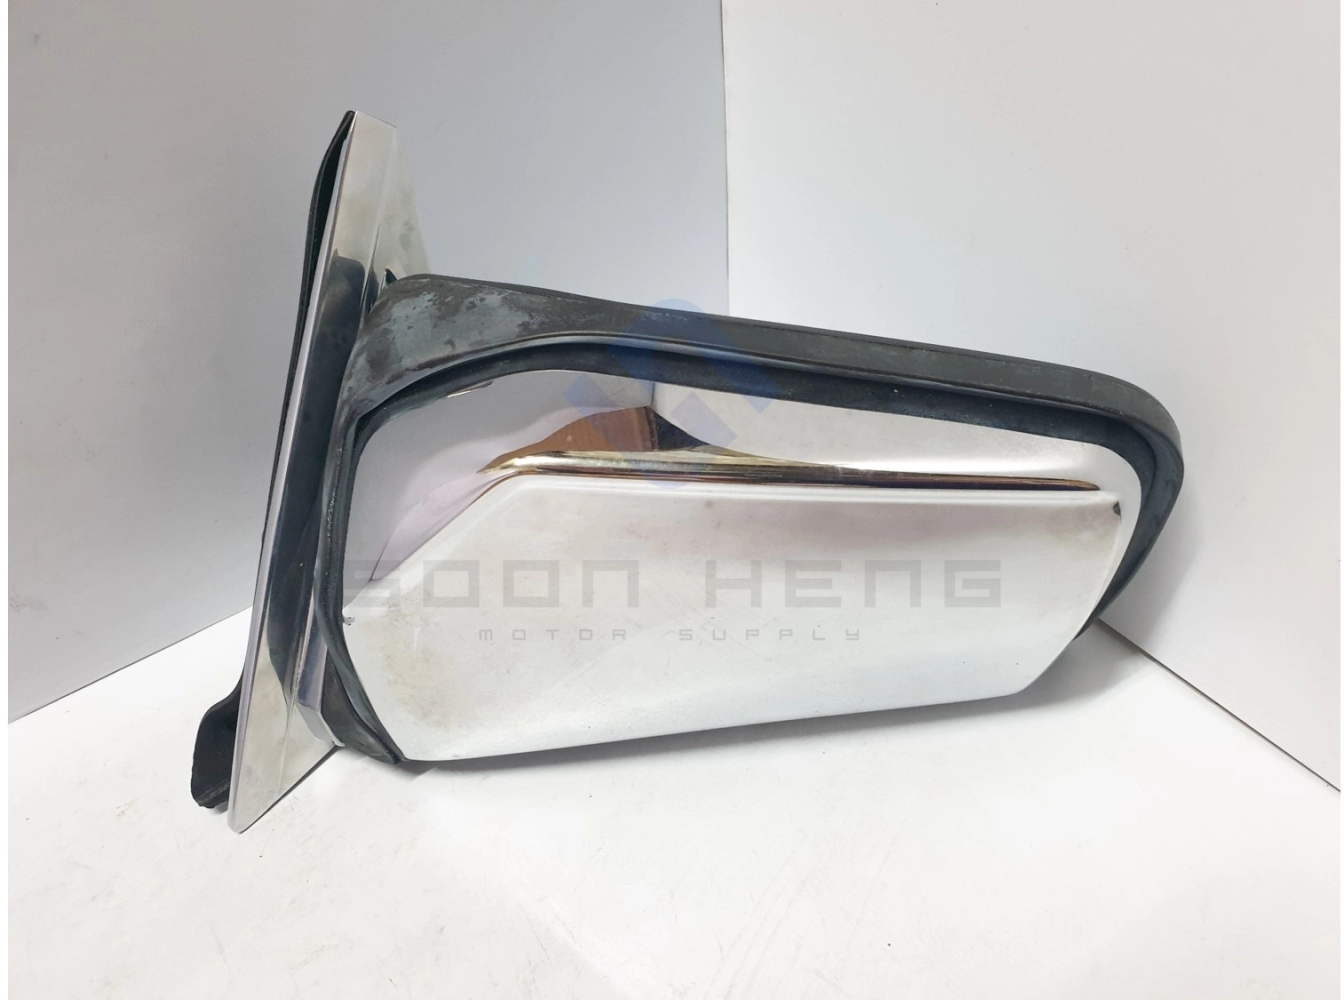 Mercedes-Benz W123 - Manual Left Side View Mirror Complete Unit (ULO)